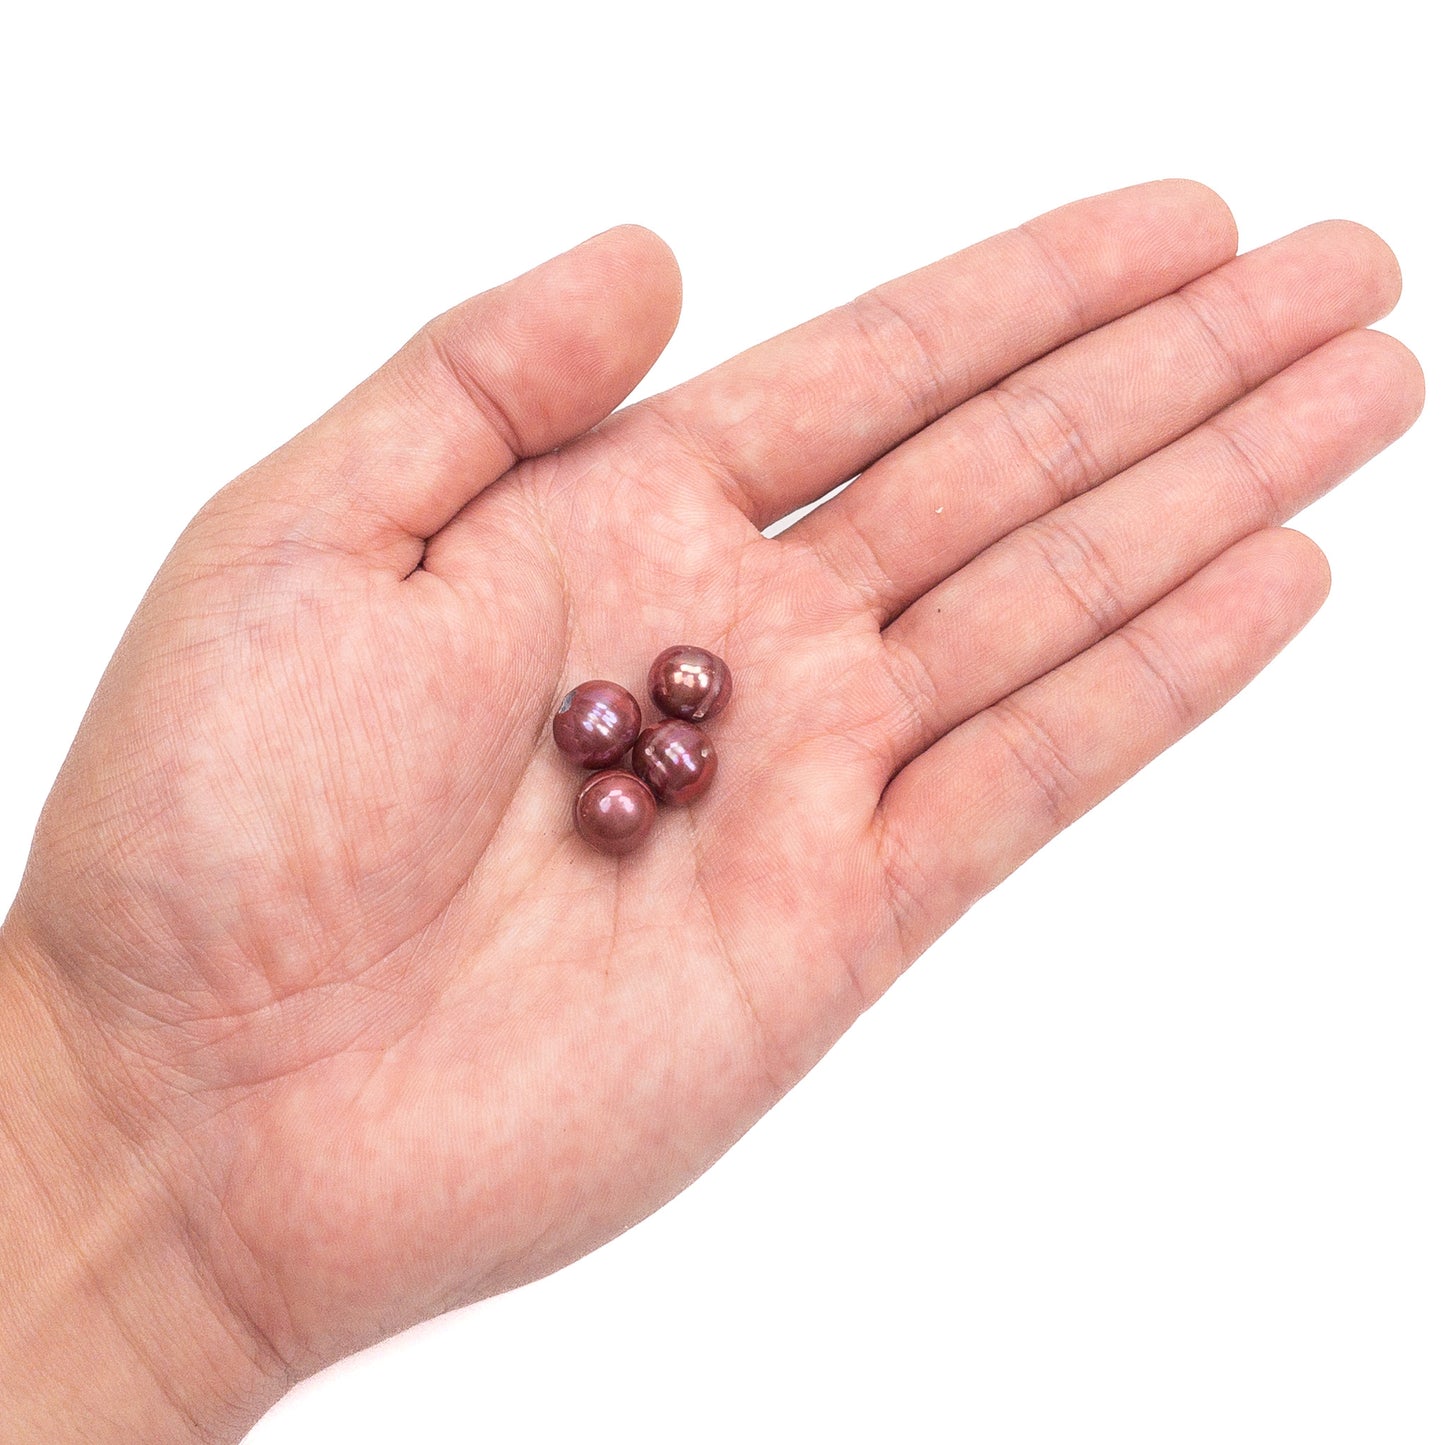 Maroon 10mm Freshwater Pearl with Large Hole Bead - 1 pc.